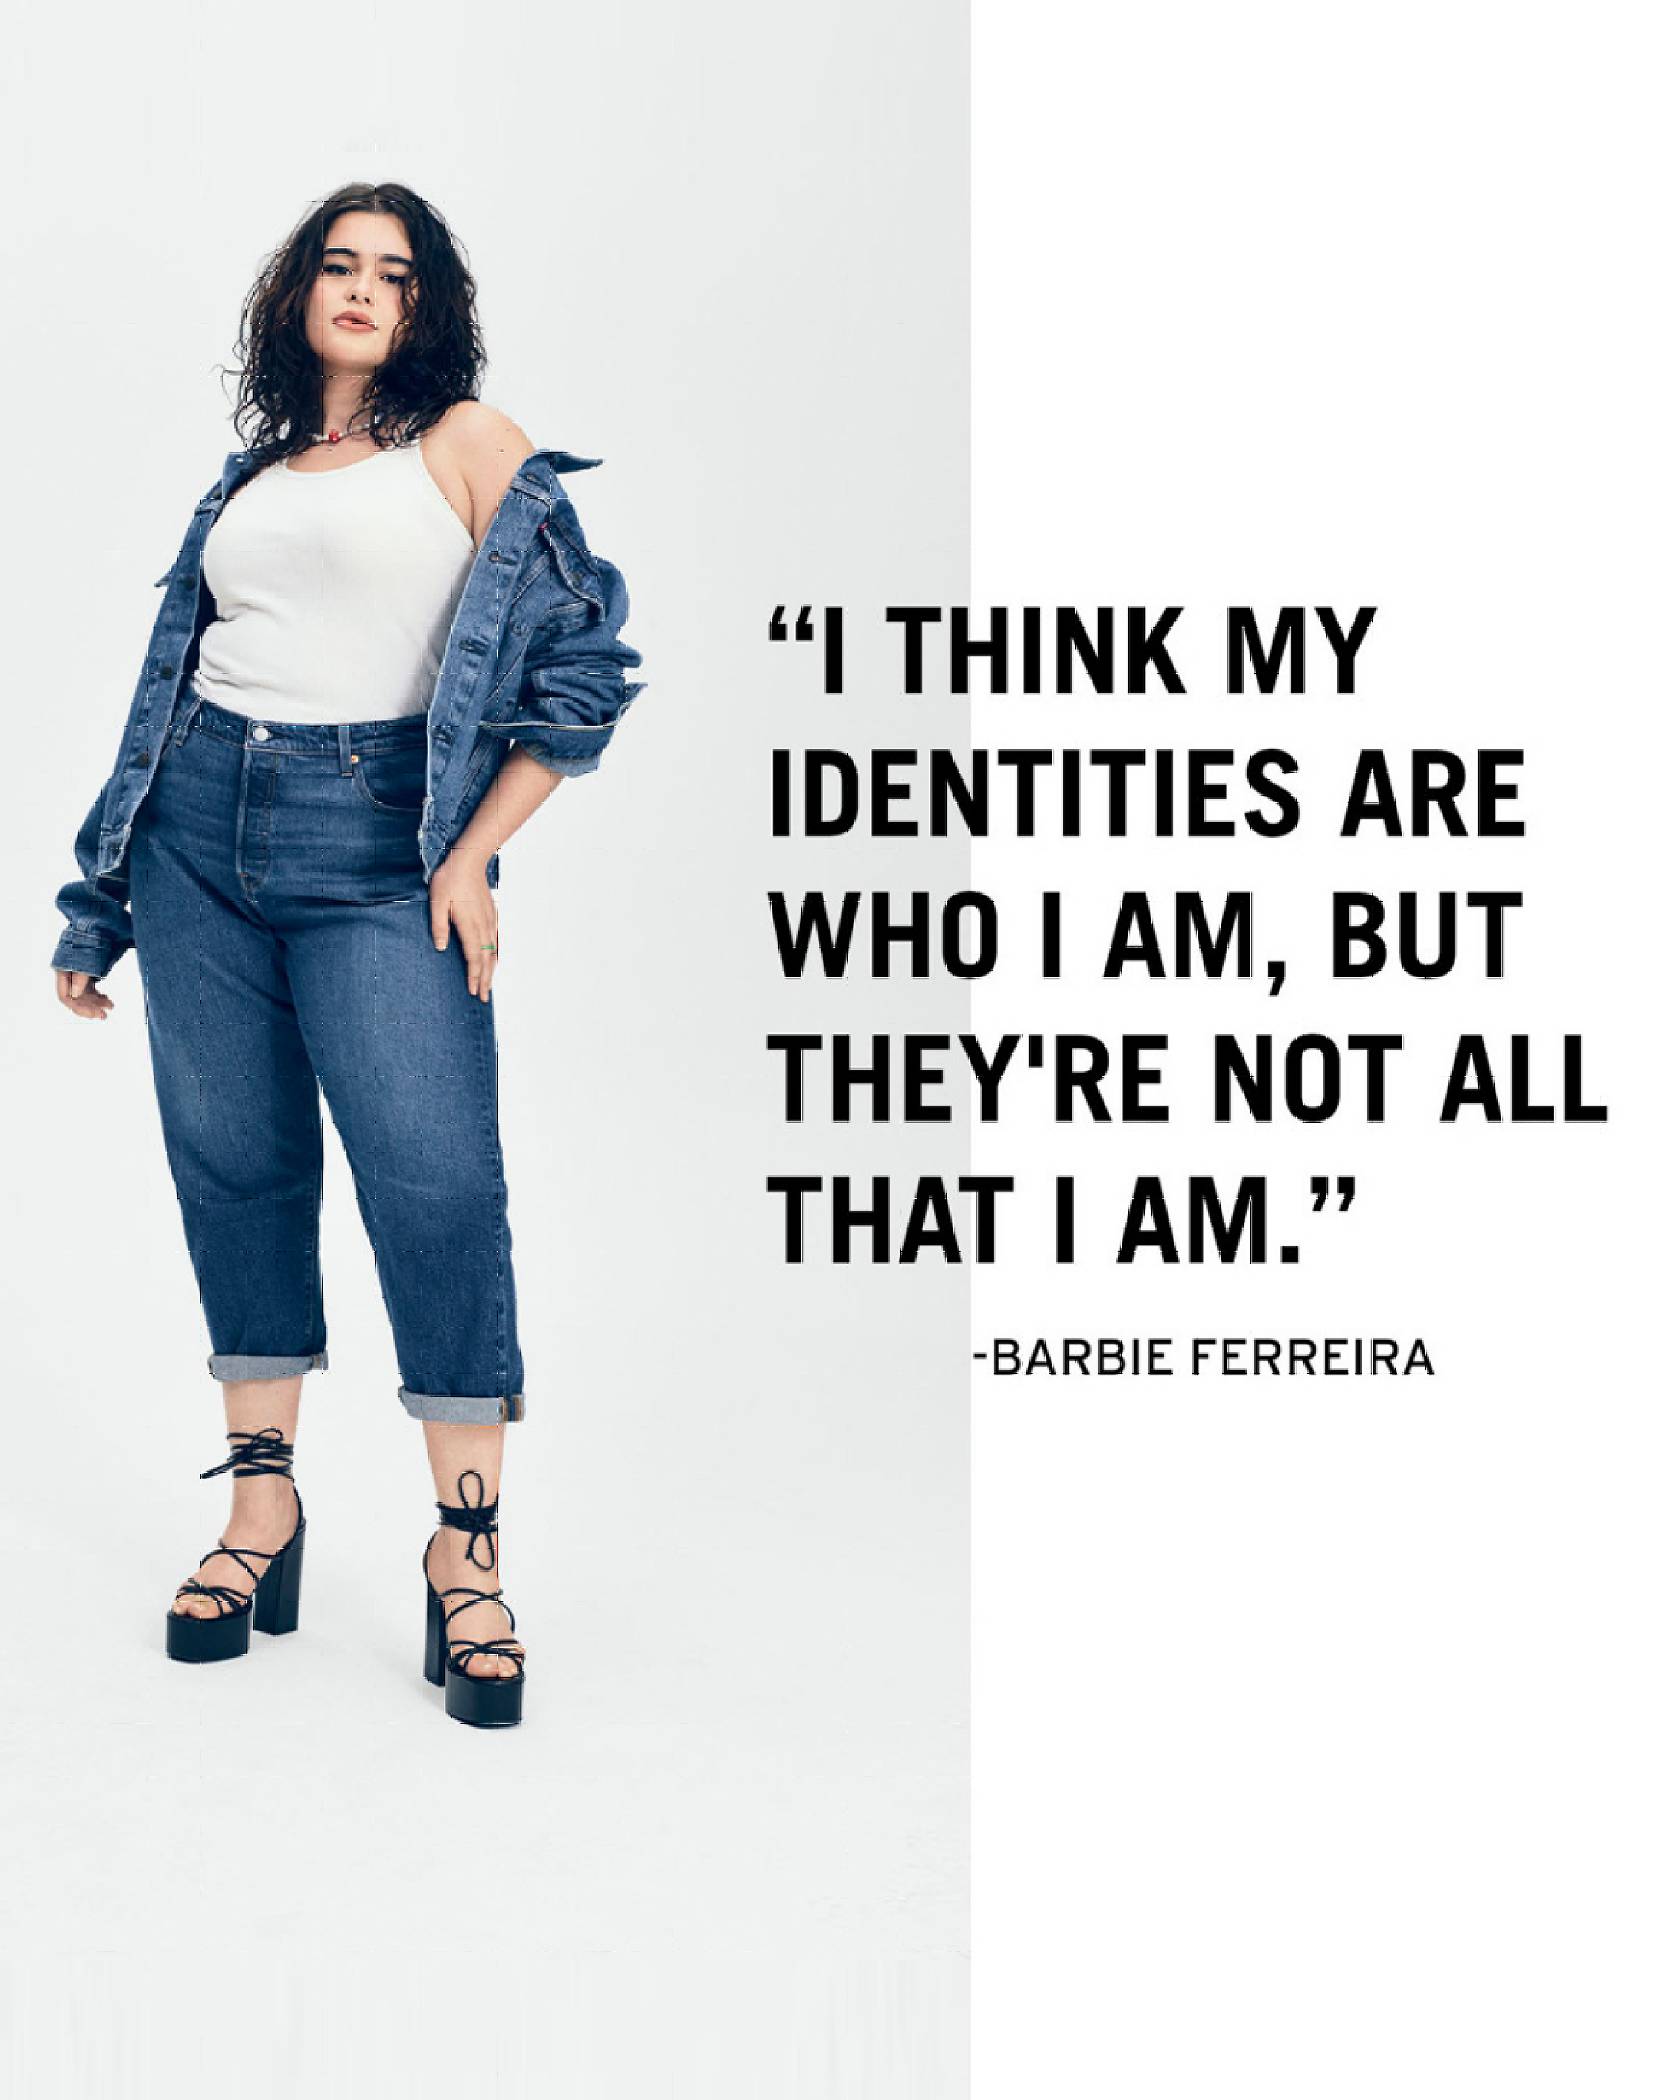 Barbie wearing a Levi's Trucker jacket and jeans overlaid with the quote, "I think my identities are who I am, but they're not all that I am" - Barbie Ferreira